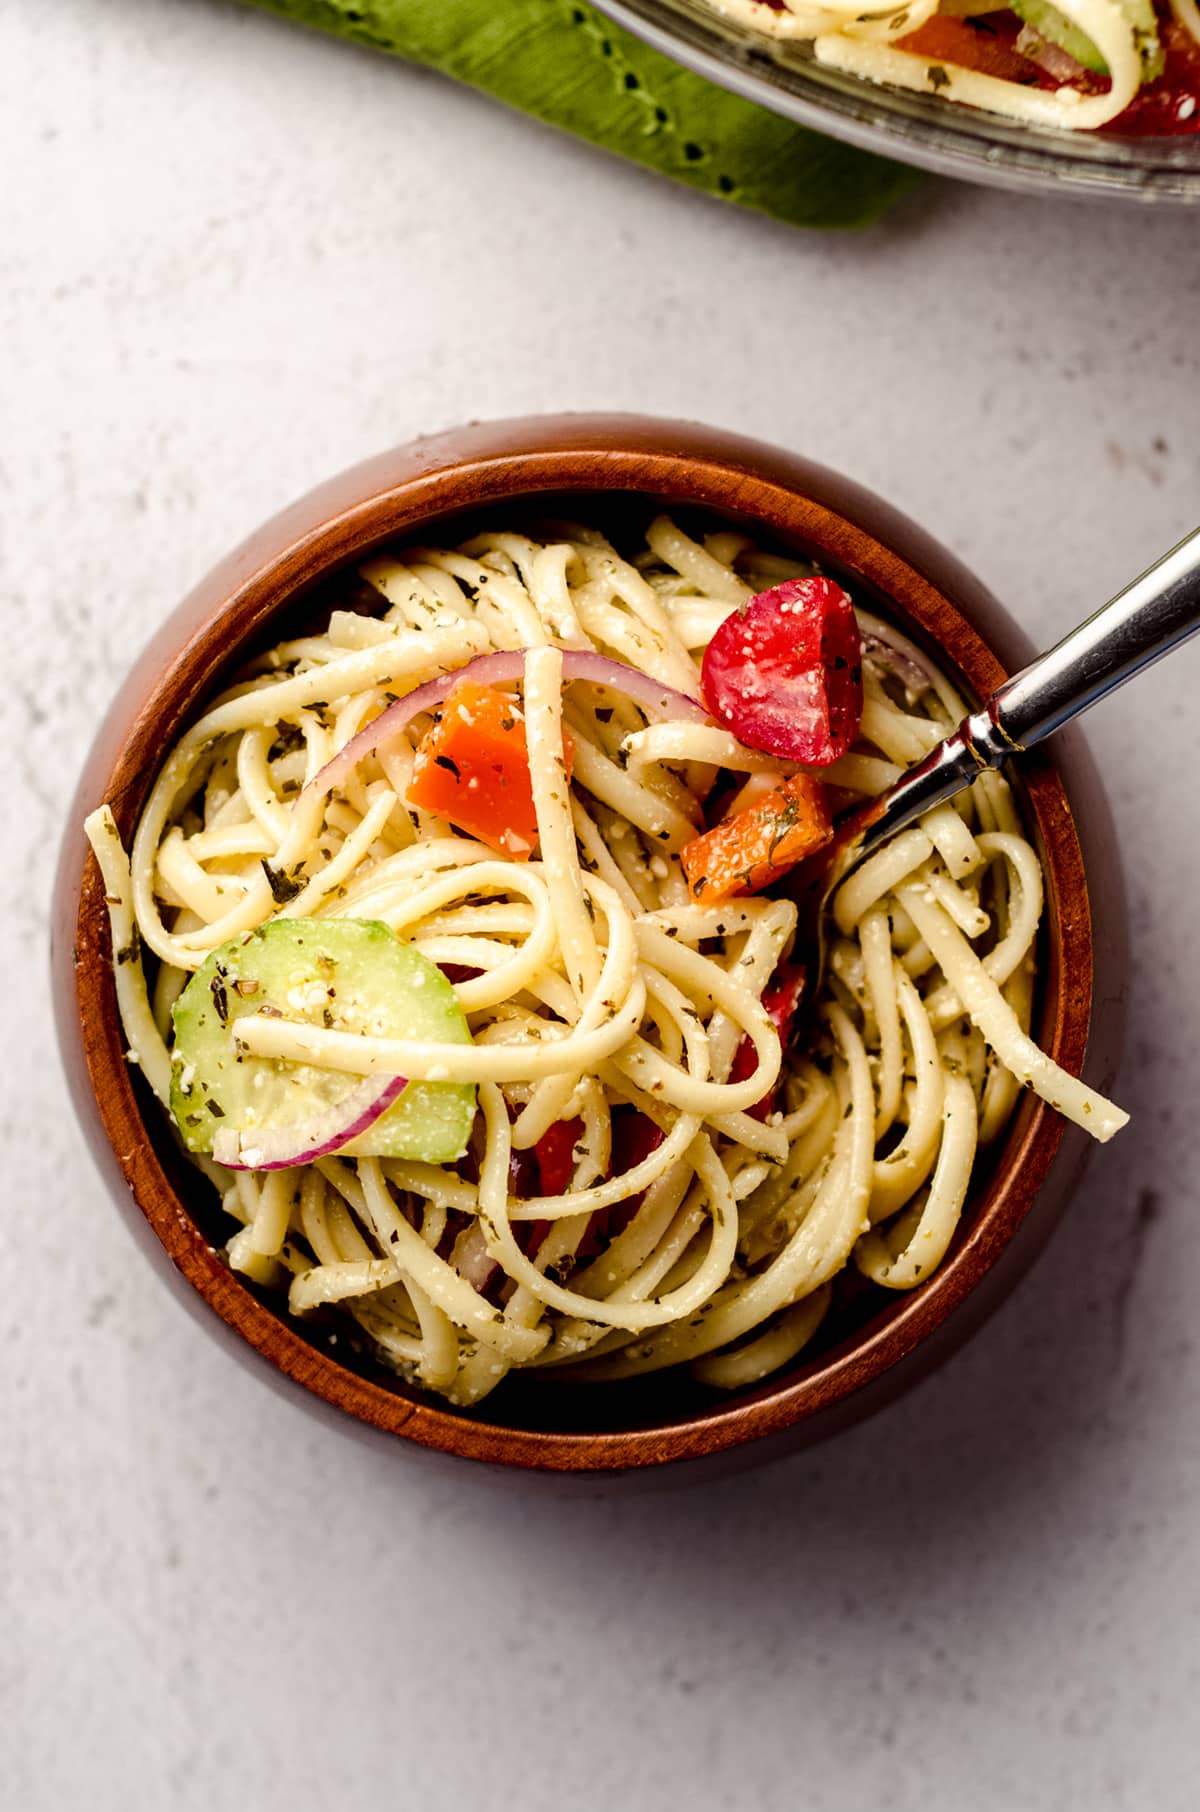 Cold Pasta Salad with Spaghetti Noodles